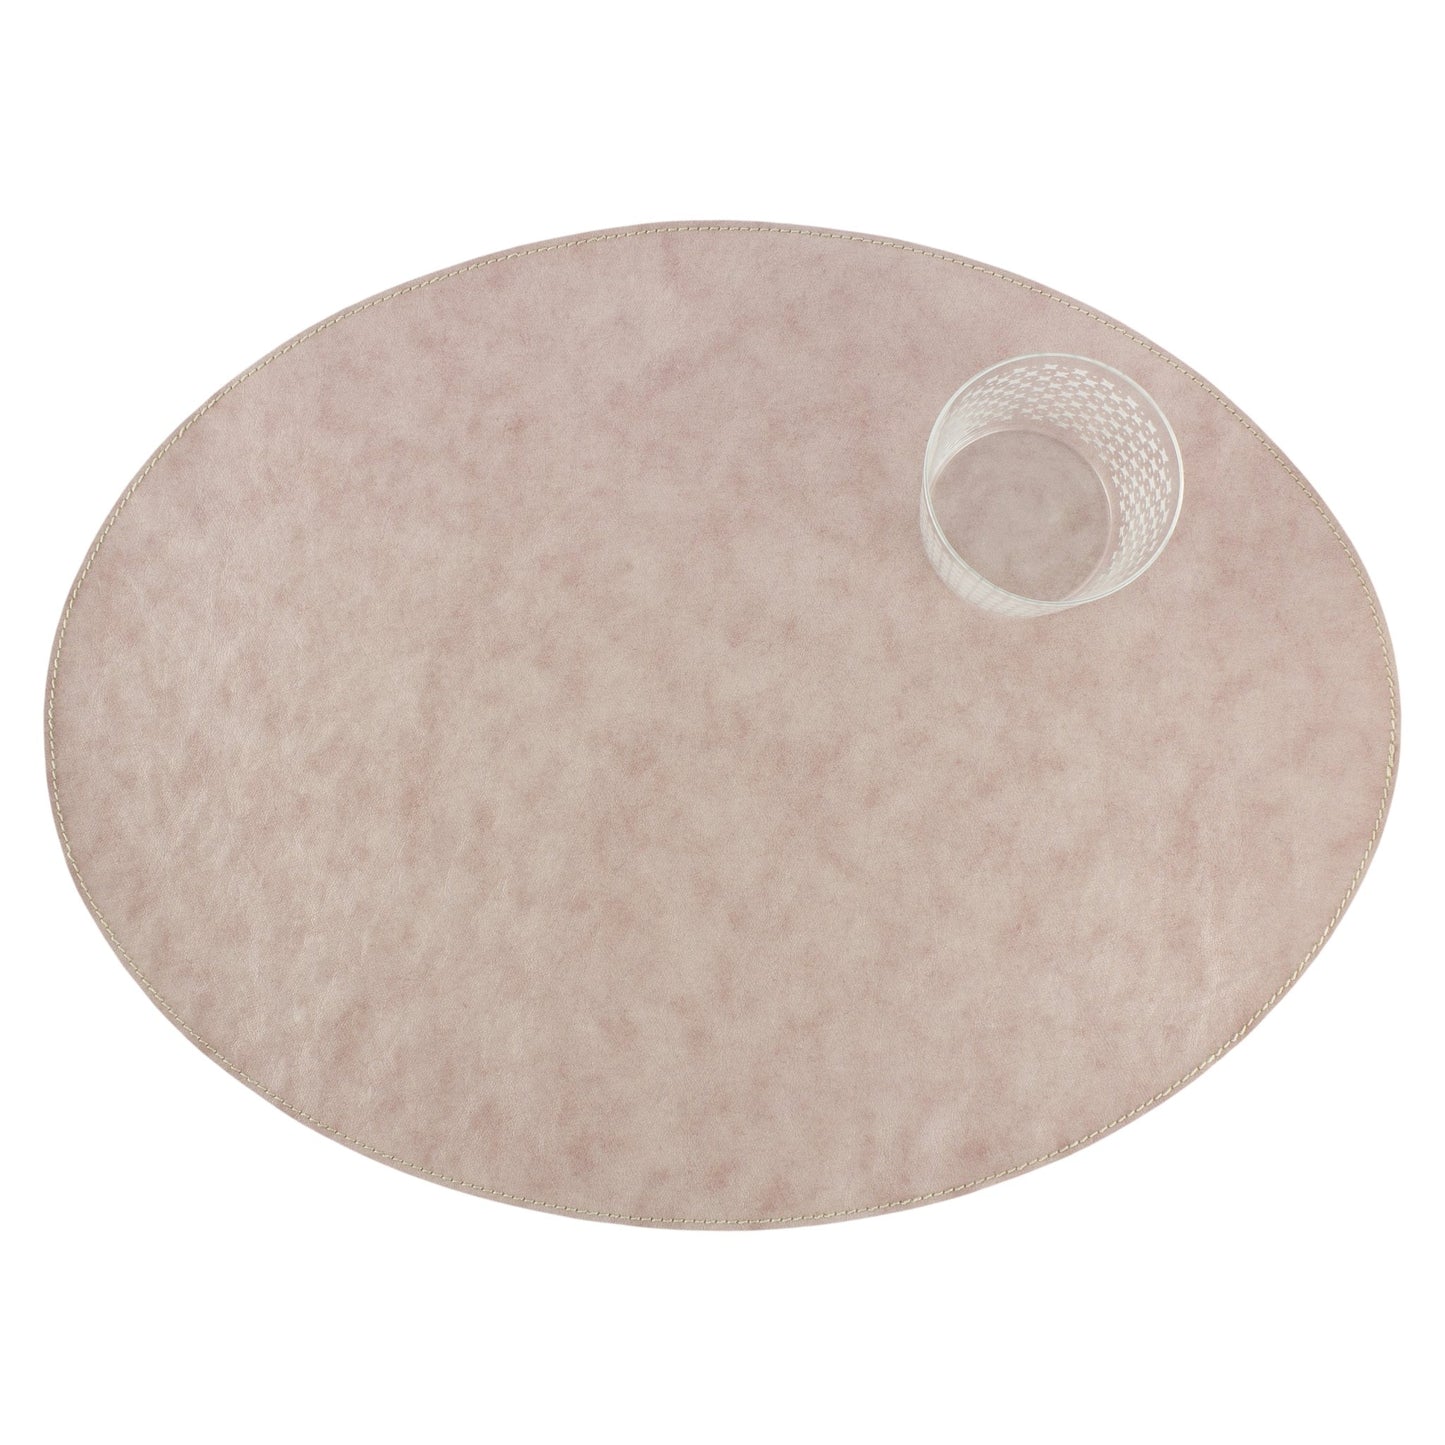 An oval washable paper placemats is shown with a small drinking glass in the upper right hand corner. The placemat shown is pale pink.